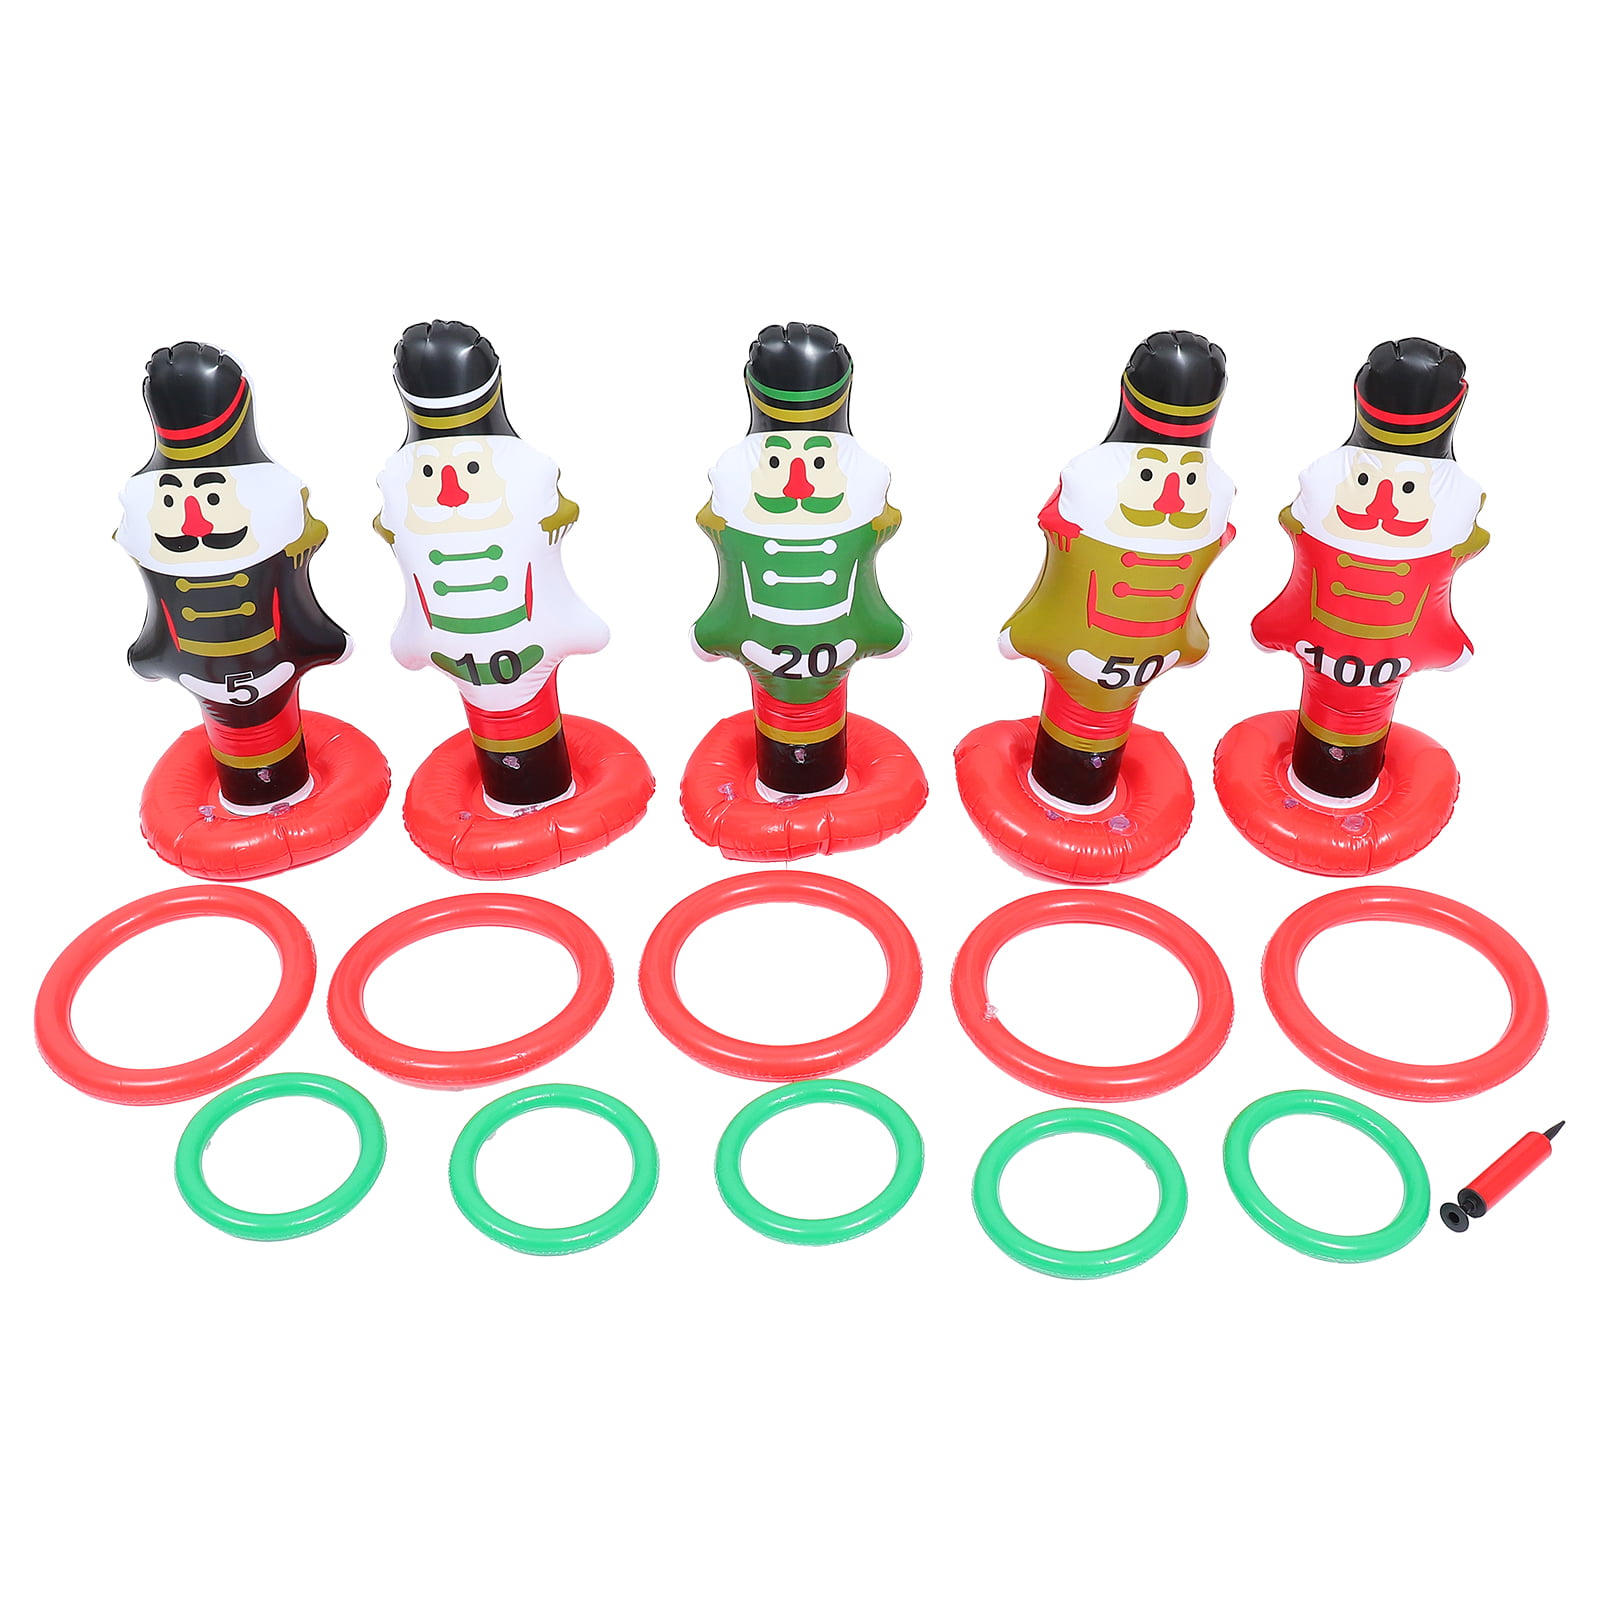 Wooden Candy Cane Ring Toss - Easy Setup Holiday Game to Buy!